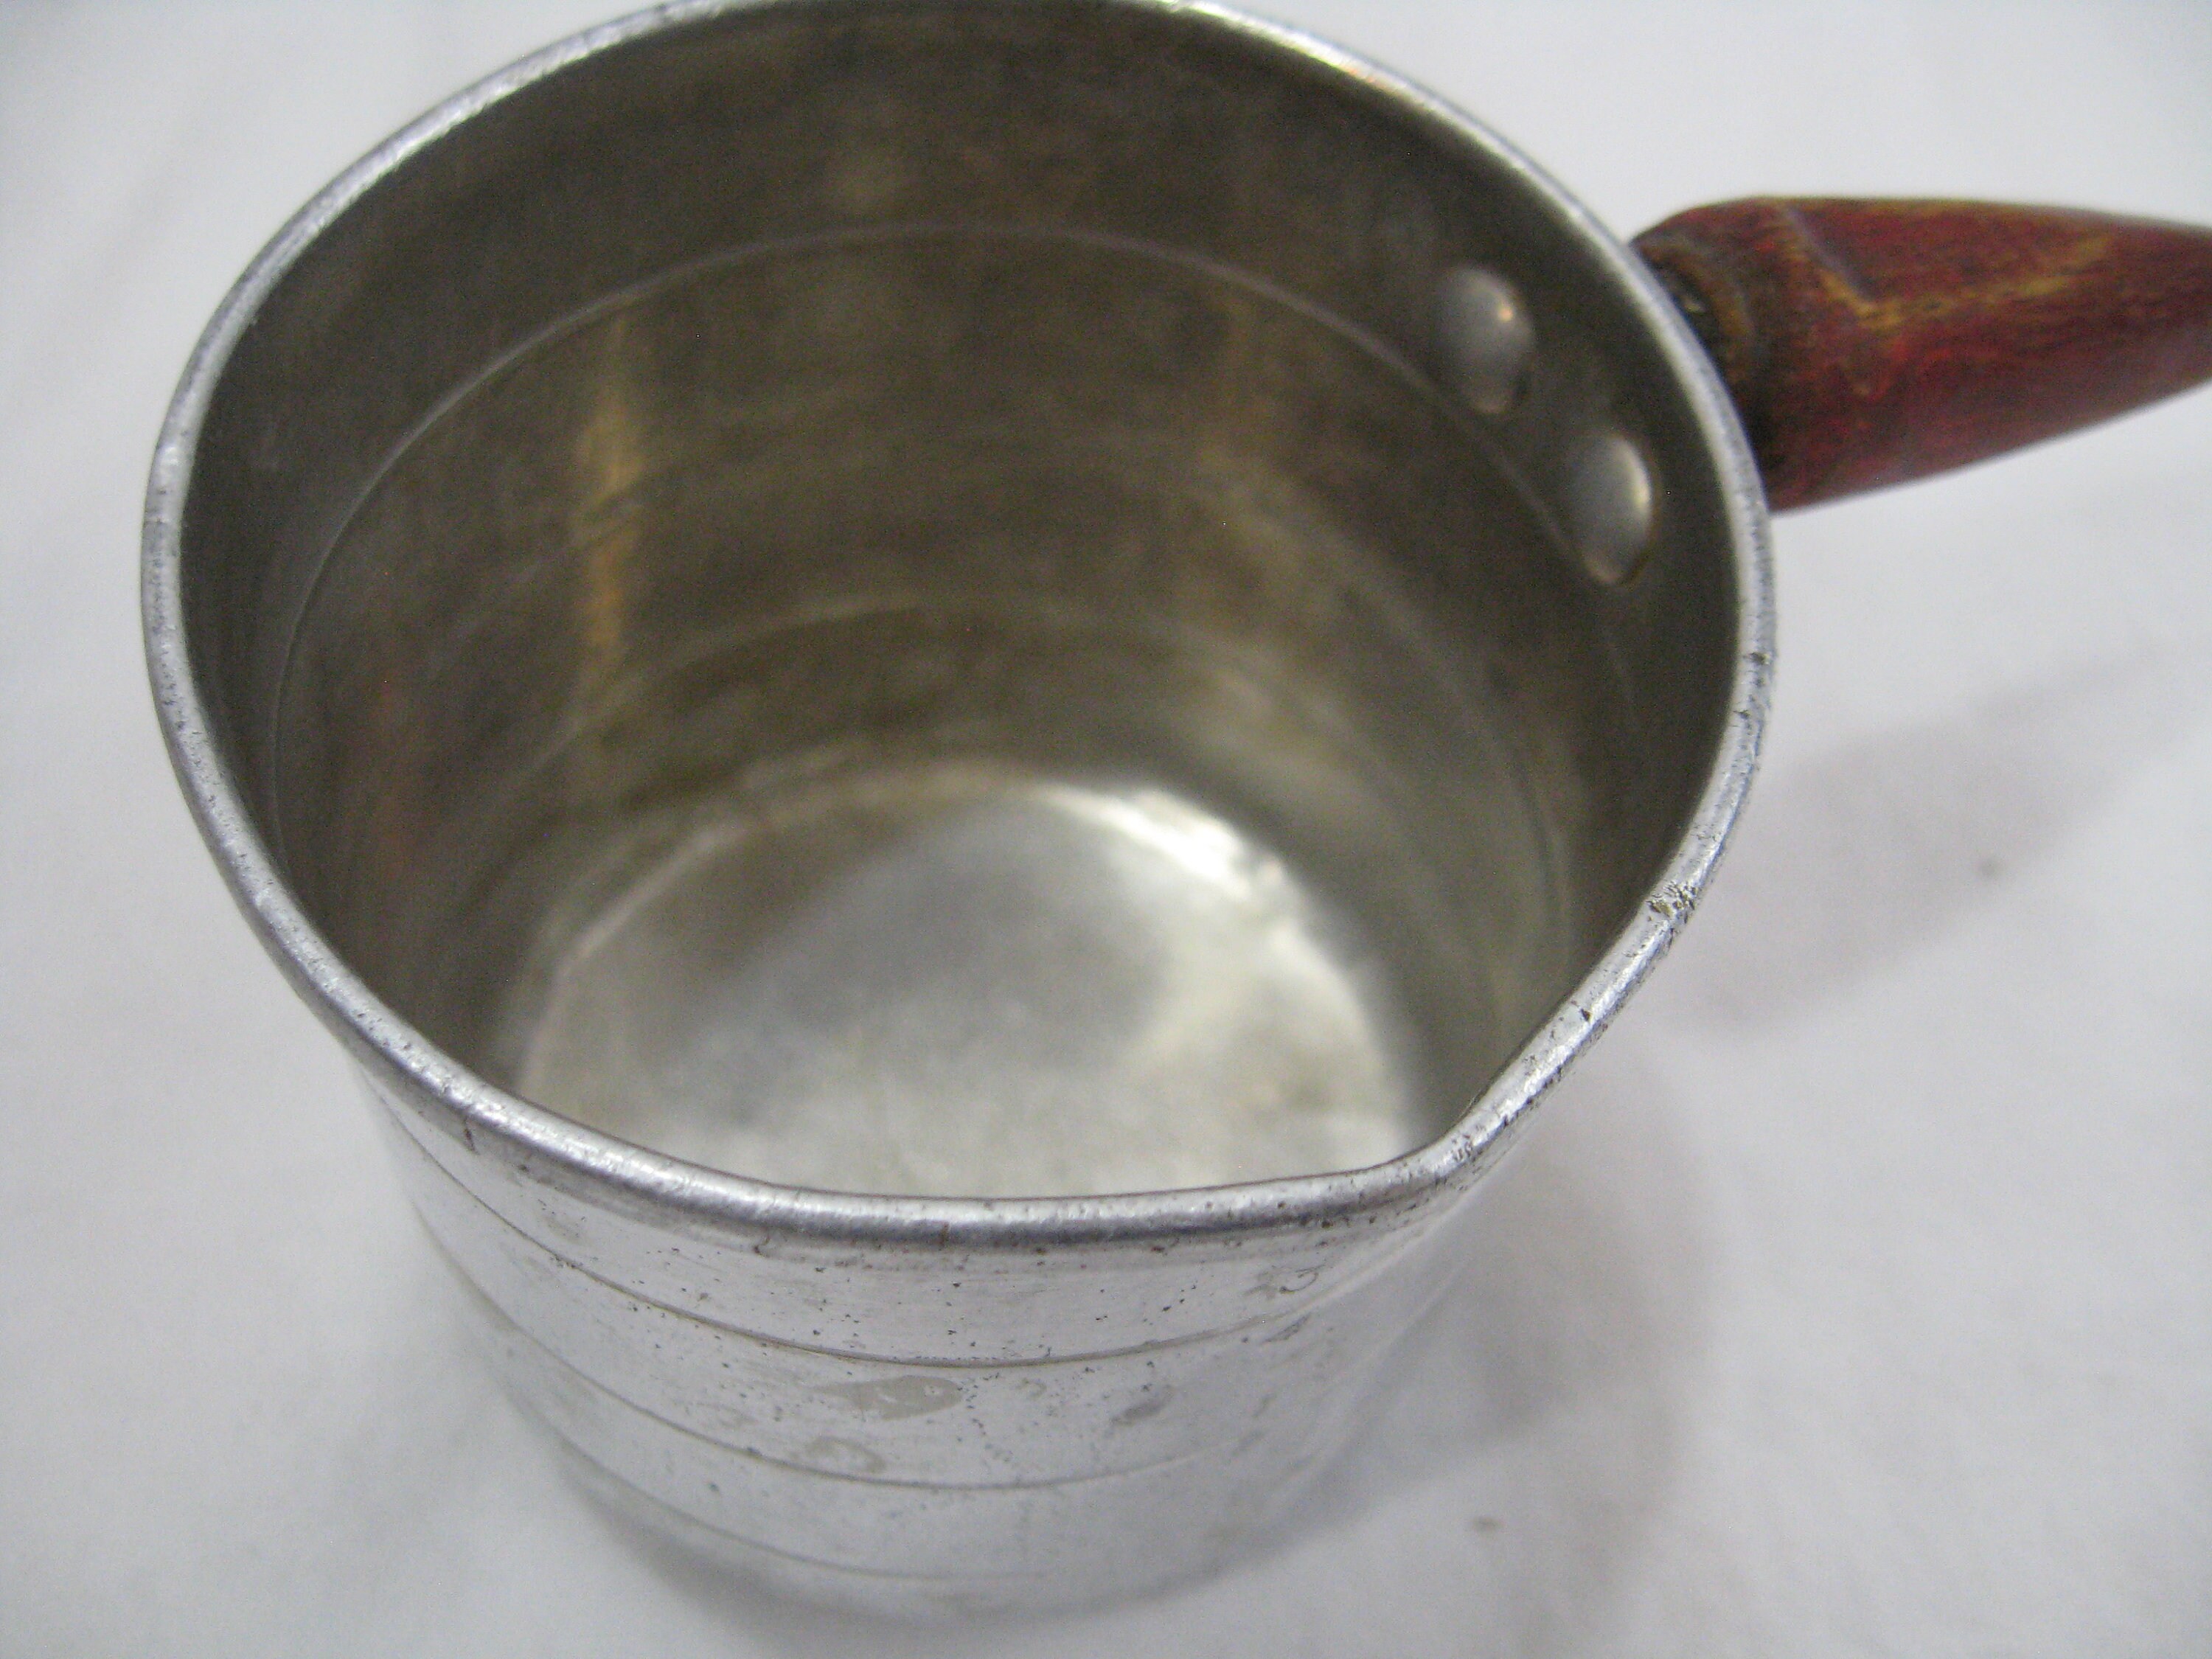 Vintage One Cup Tin Aluminum Measuring Cup Flour Scoop w/ Red Wood Handle  Baking